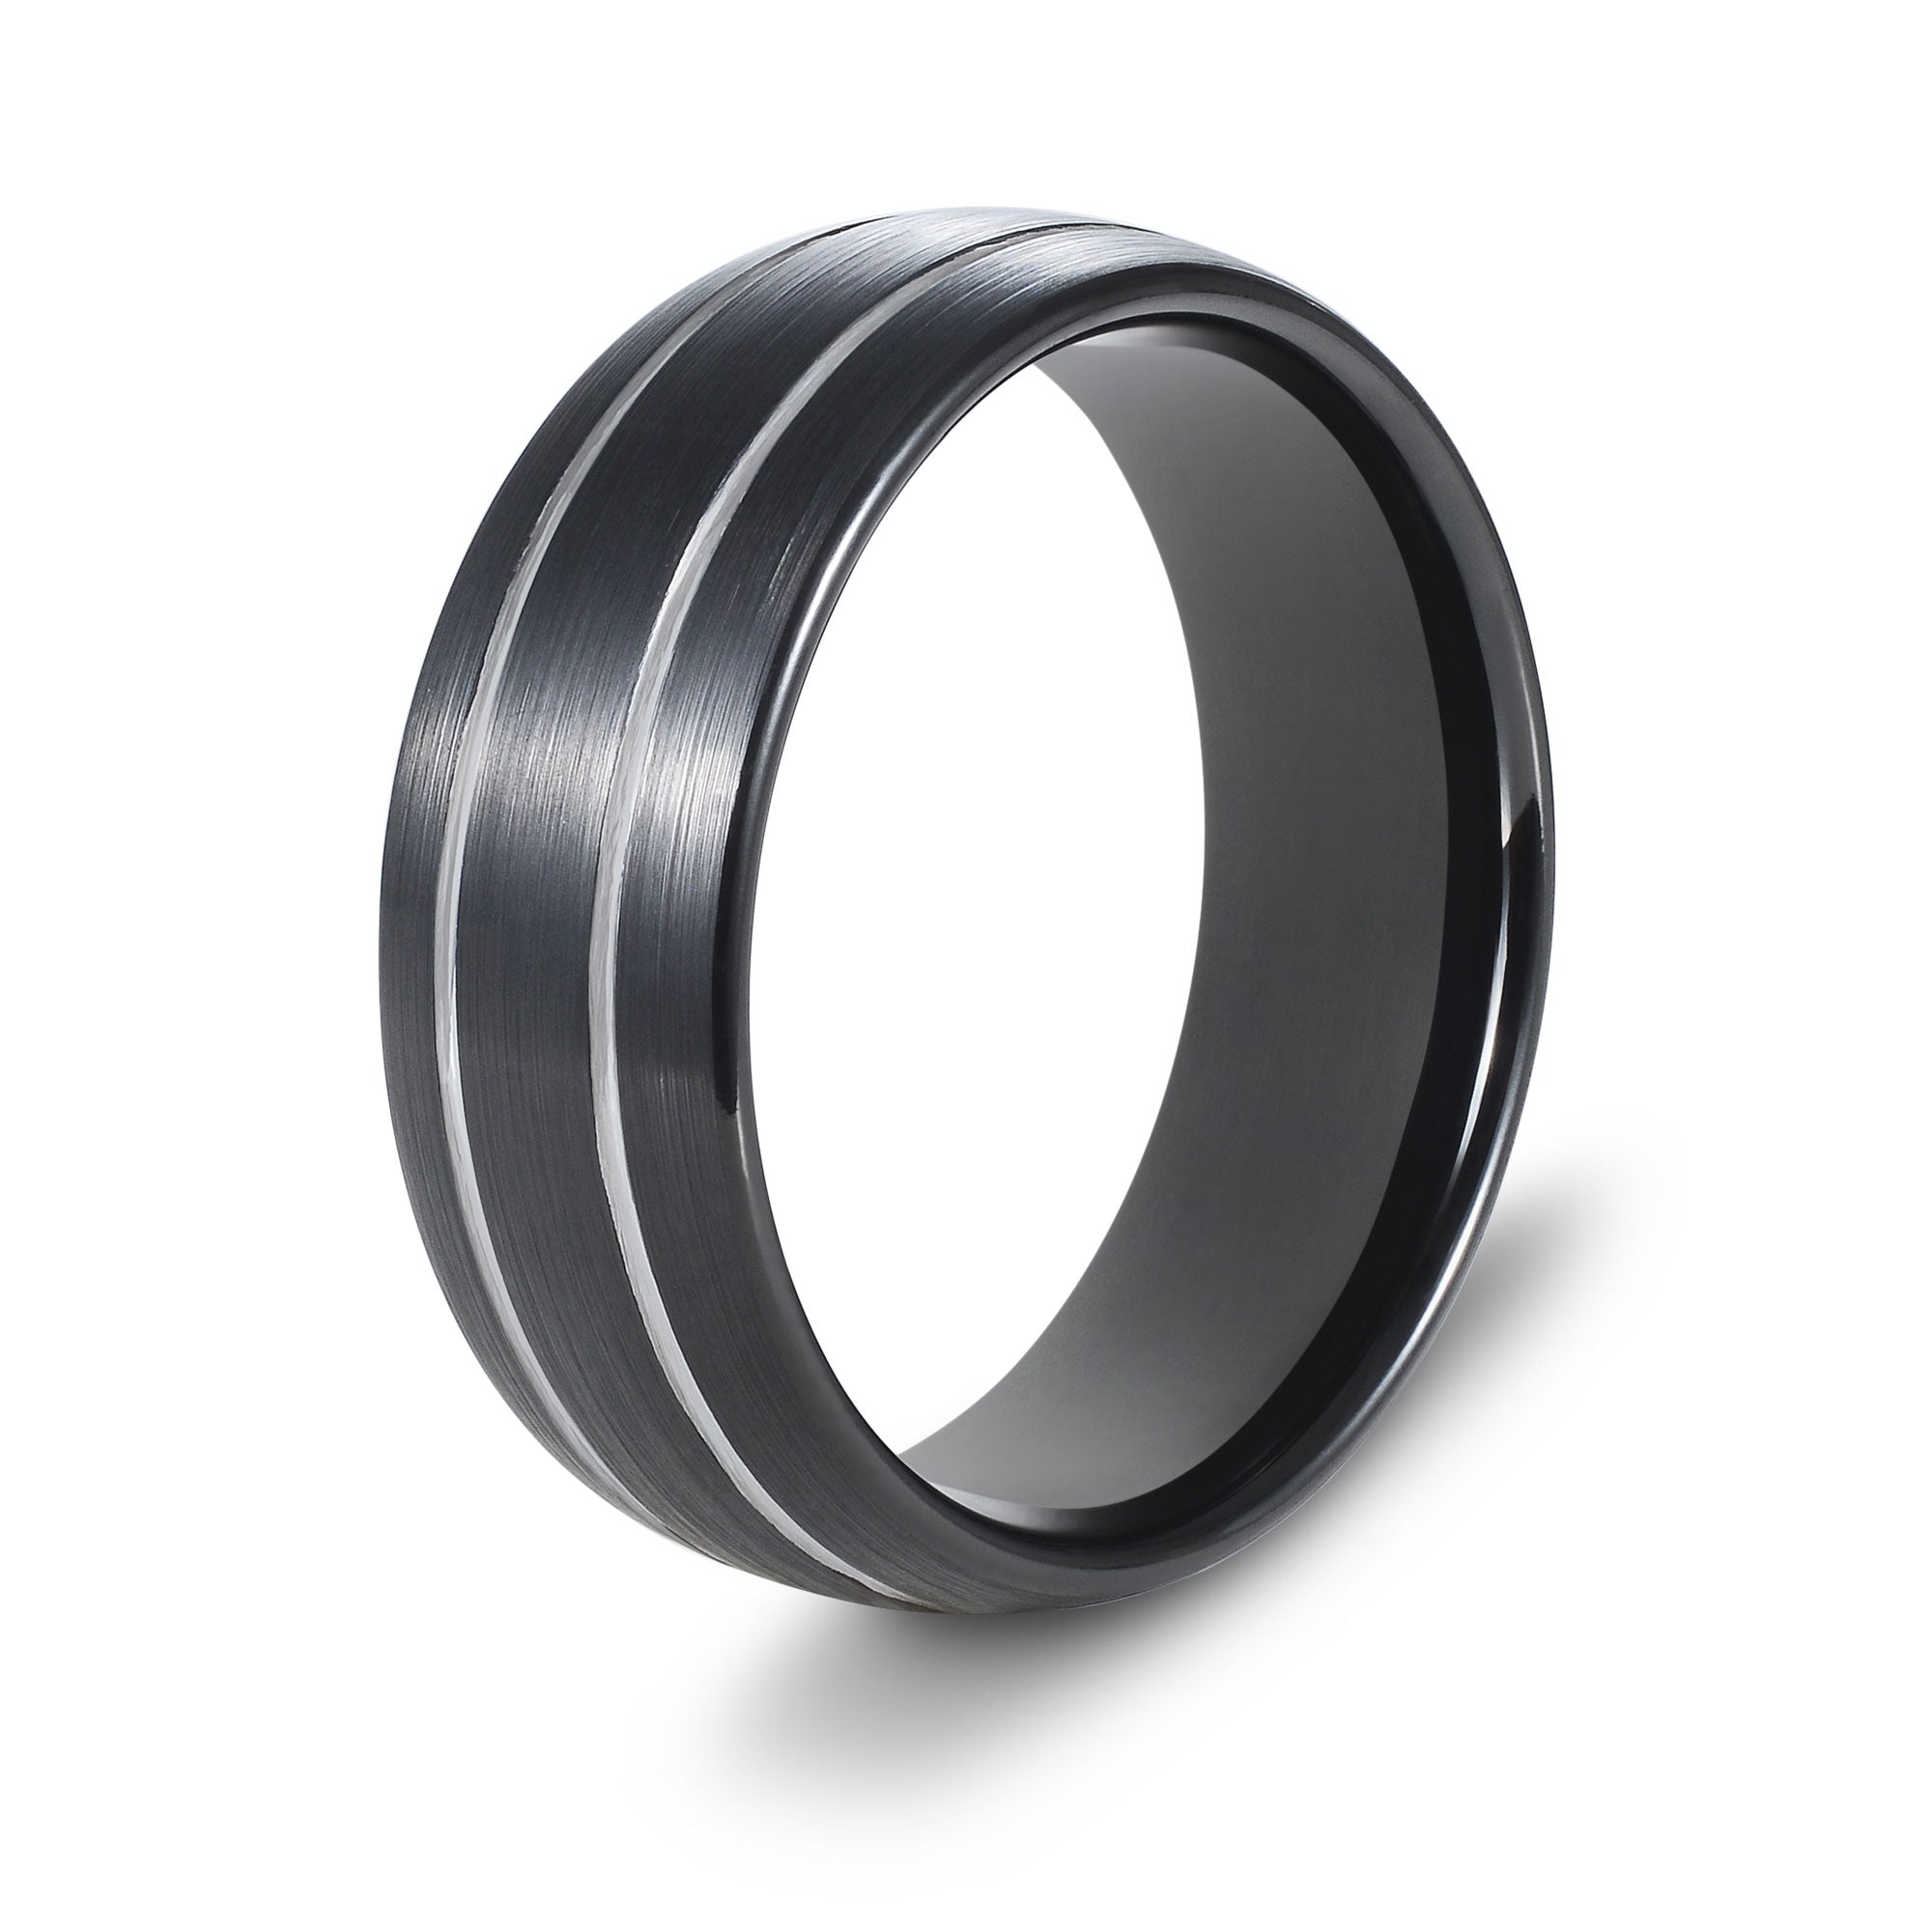 The Everlast - Black Brushed With Silver Inlay Tungsten Curved Ring